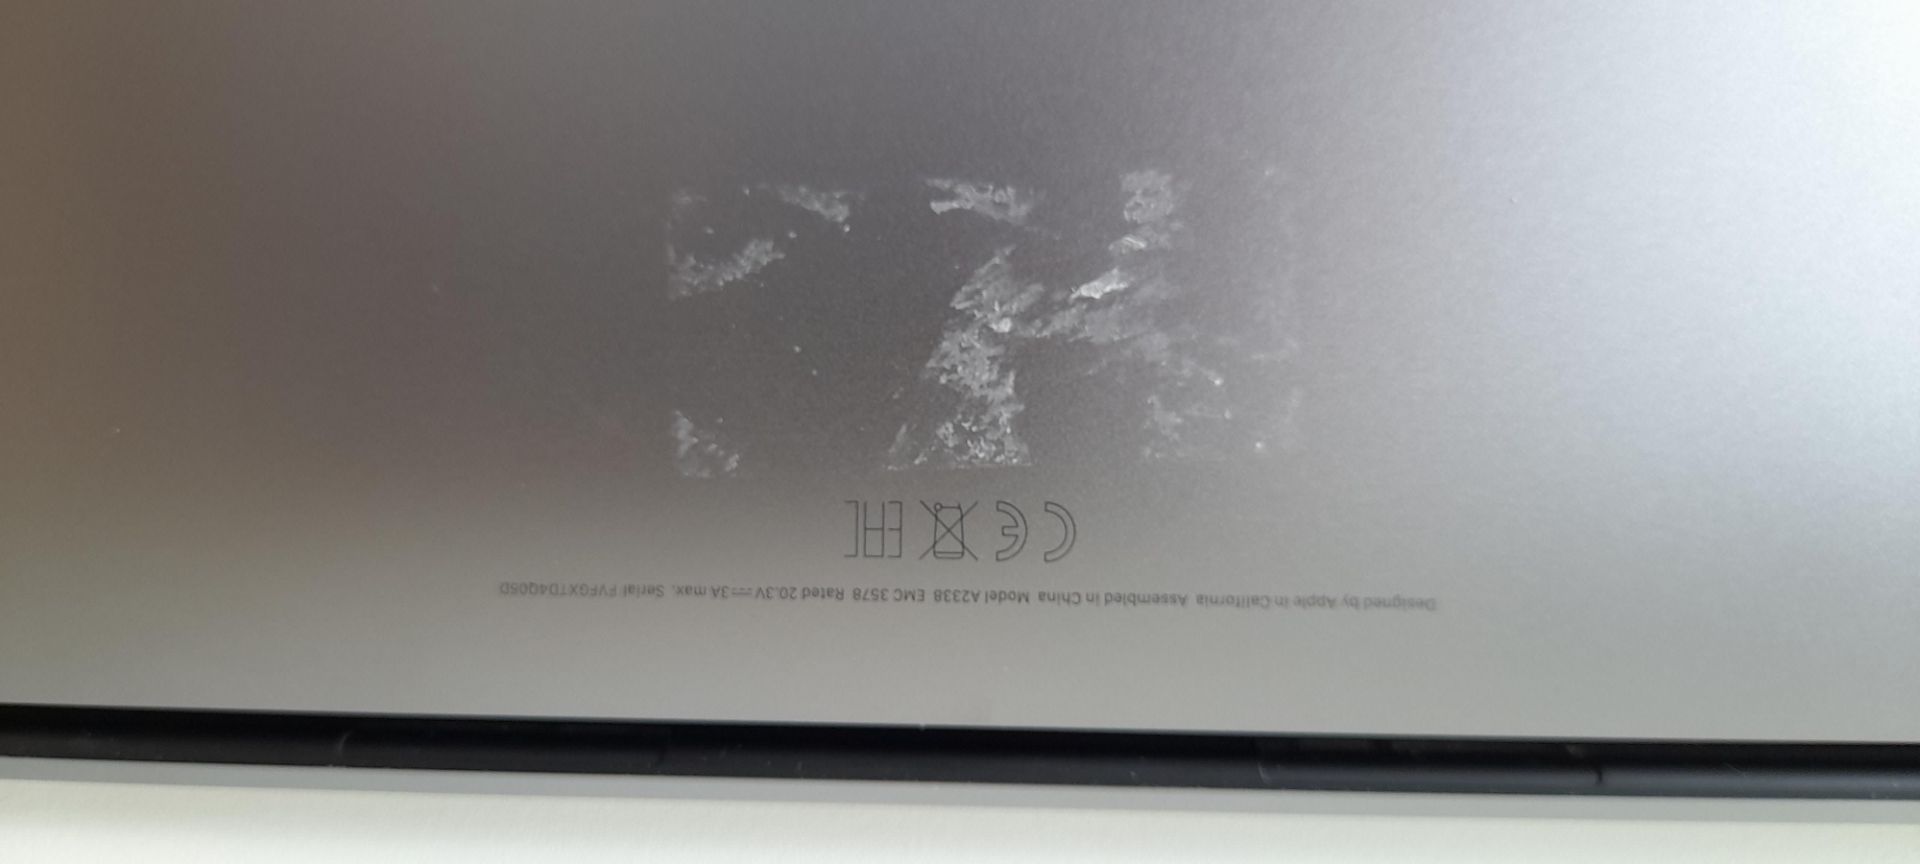 Apple MacBook Pro Model A2338 EMC3578. S/N FVFGXTD4Q05. Collection from Canary Wharf, London, E14 - Image 7 of 7